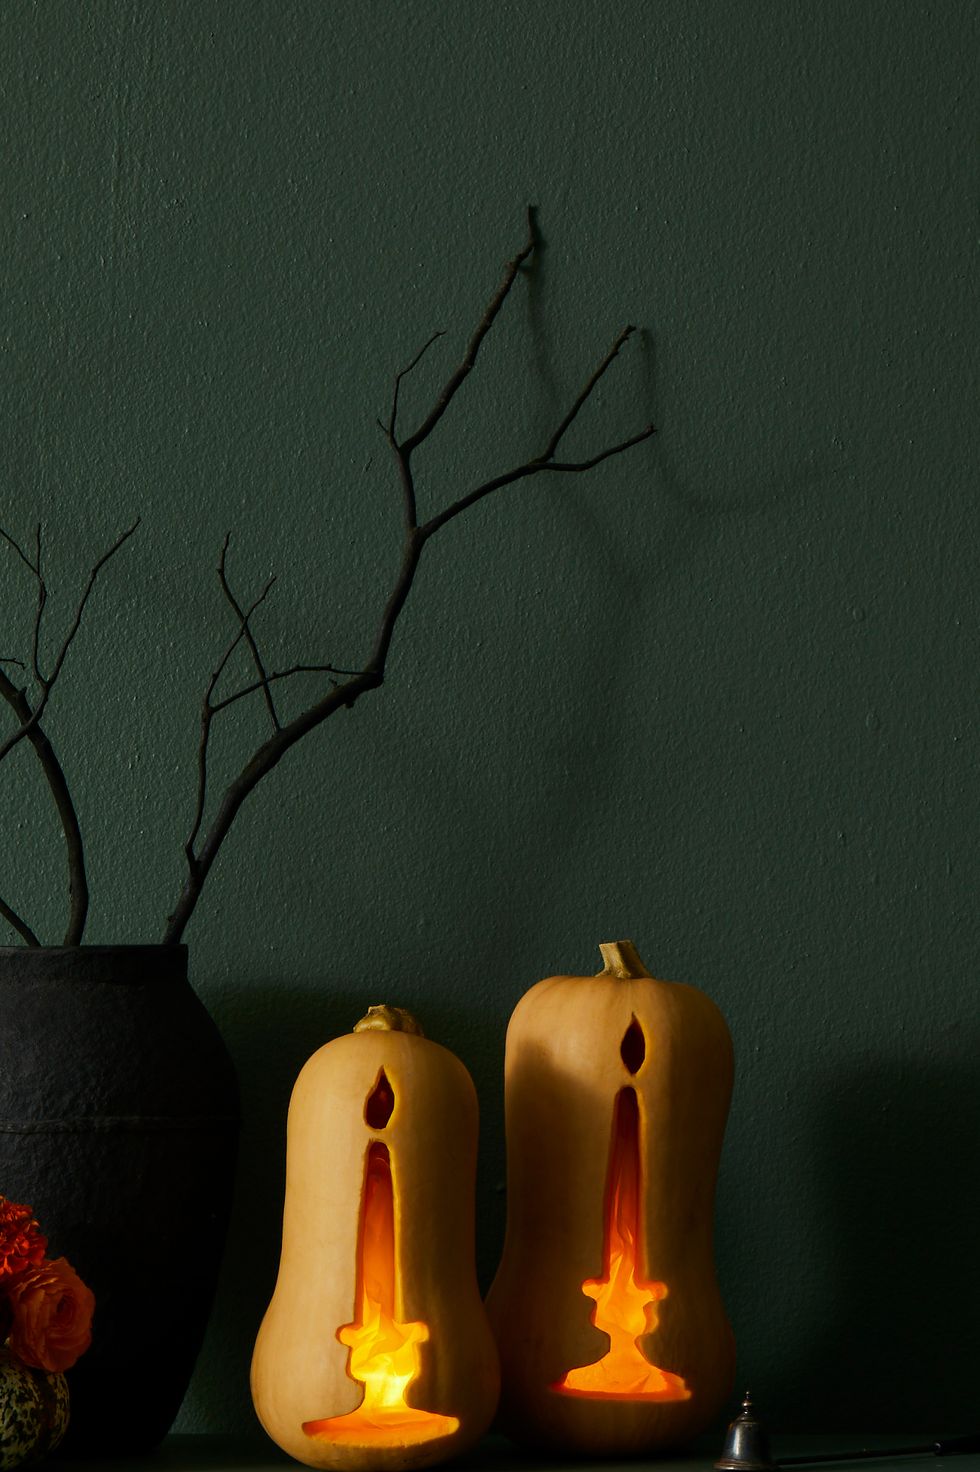 pumpkin carving ideas, two pumpkins on the mantel carved to look like candles